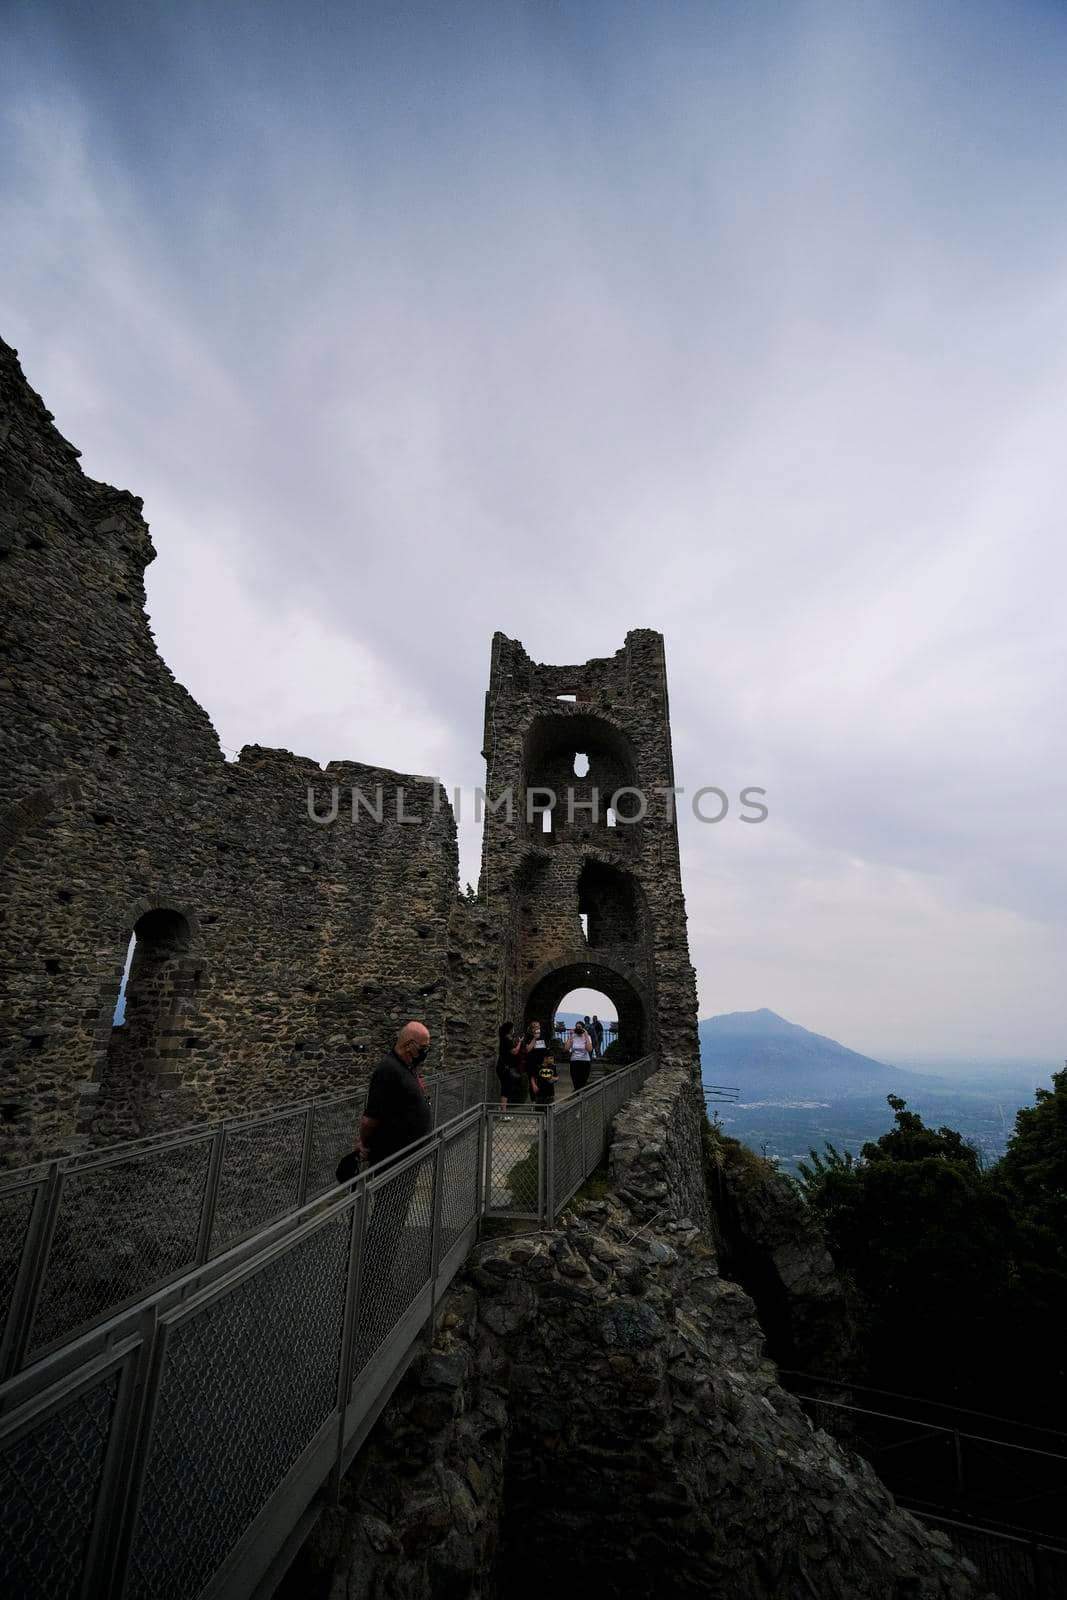 Sacra di San Michele in Turin, view from below of the cliff and walls. High quality photo